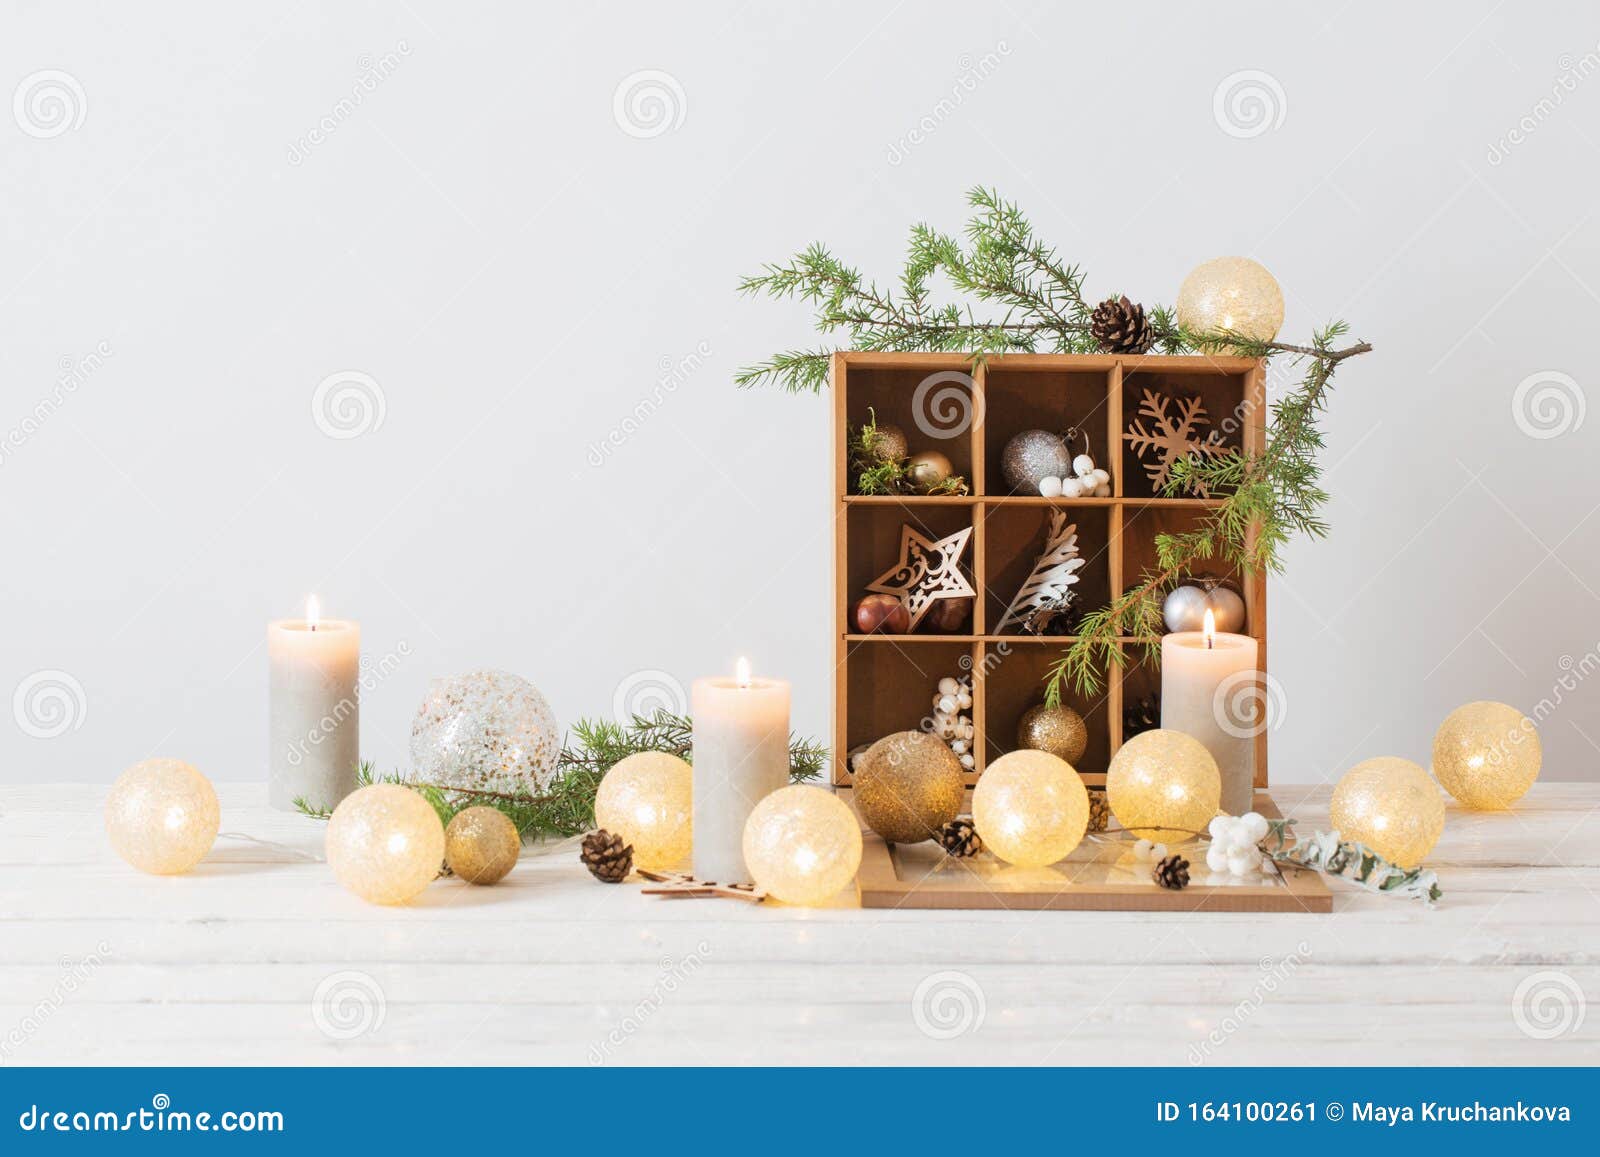 Christmas Decorations on Background White Wall Stock Image - Image of ...